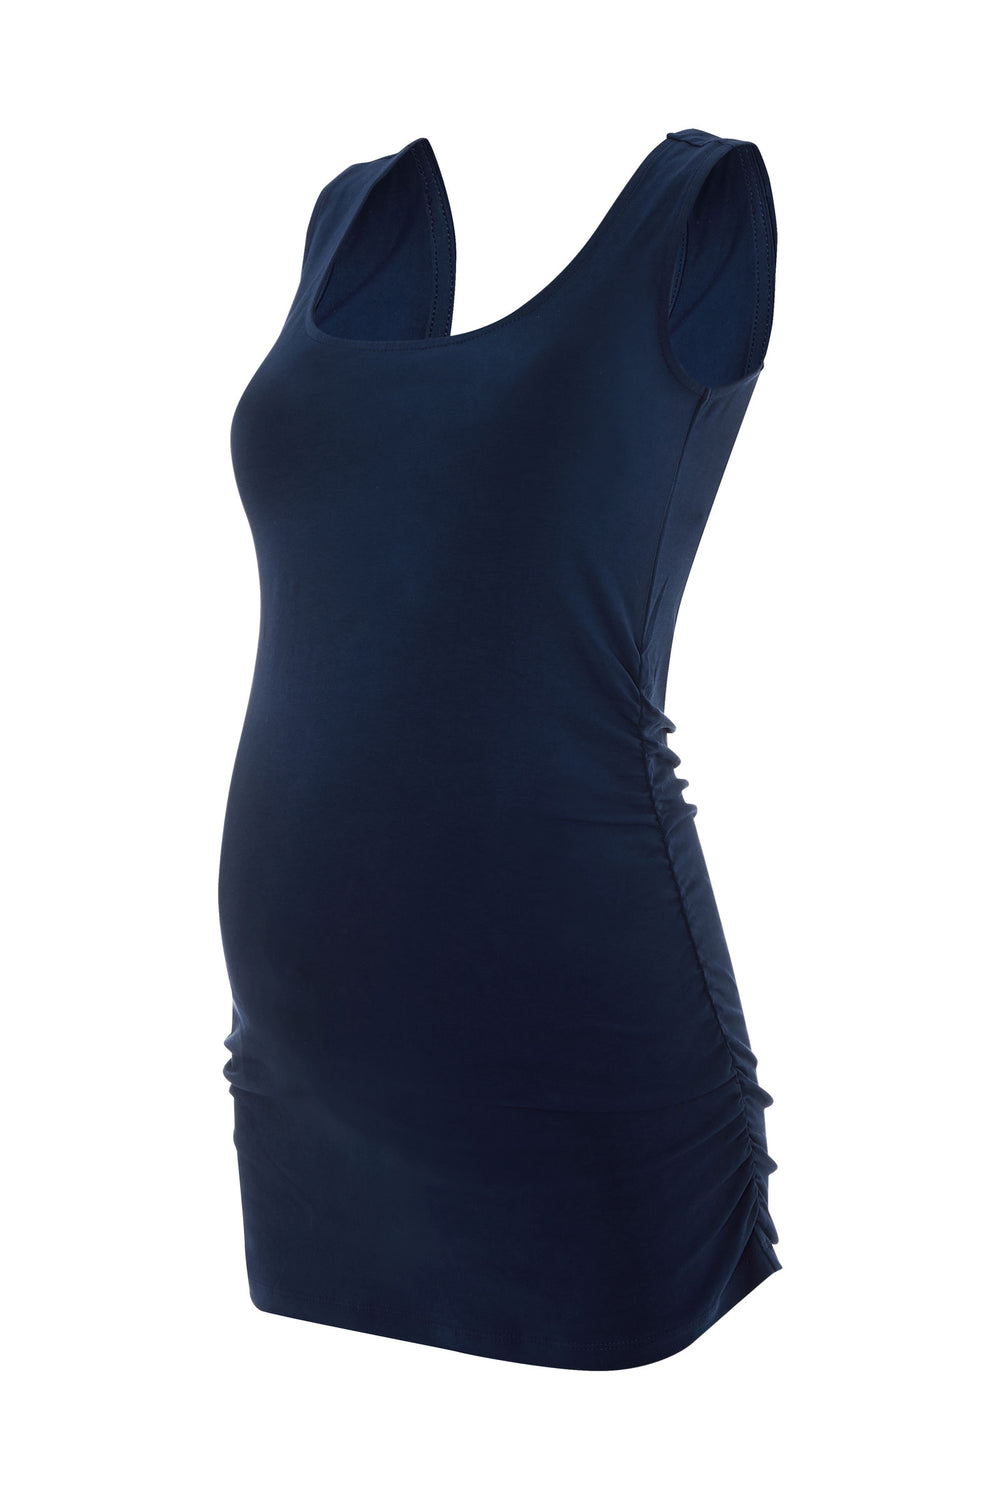 Ruched Maternity Tank Caviar And Navy Blue - Seven Women Maternity